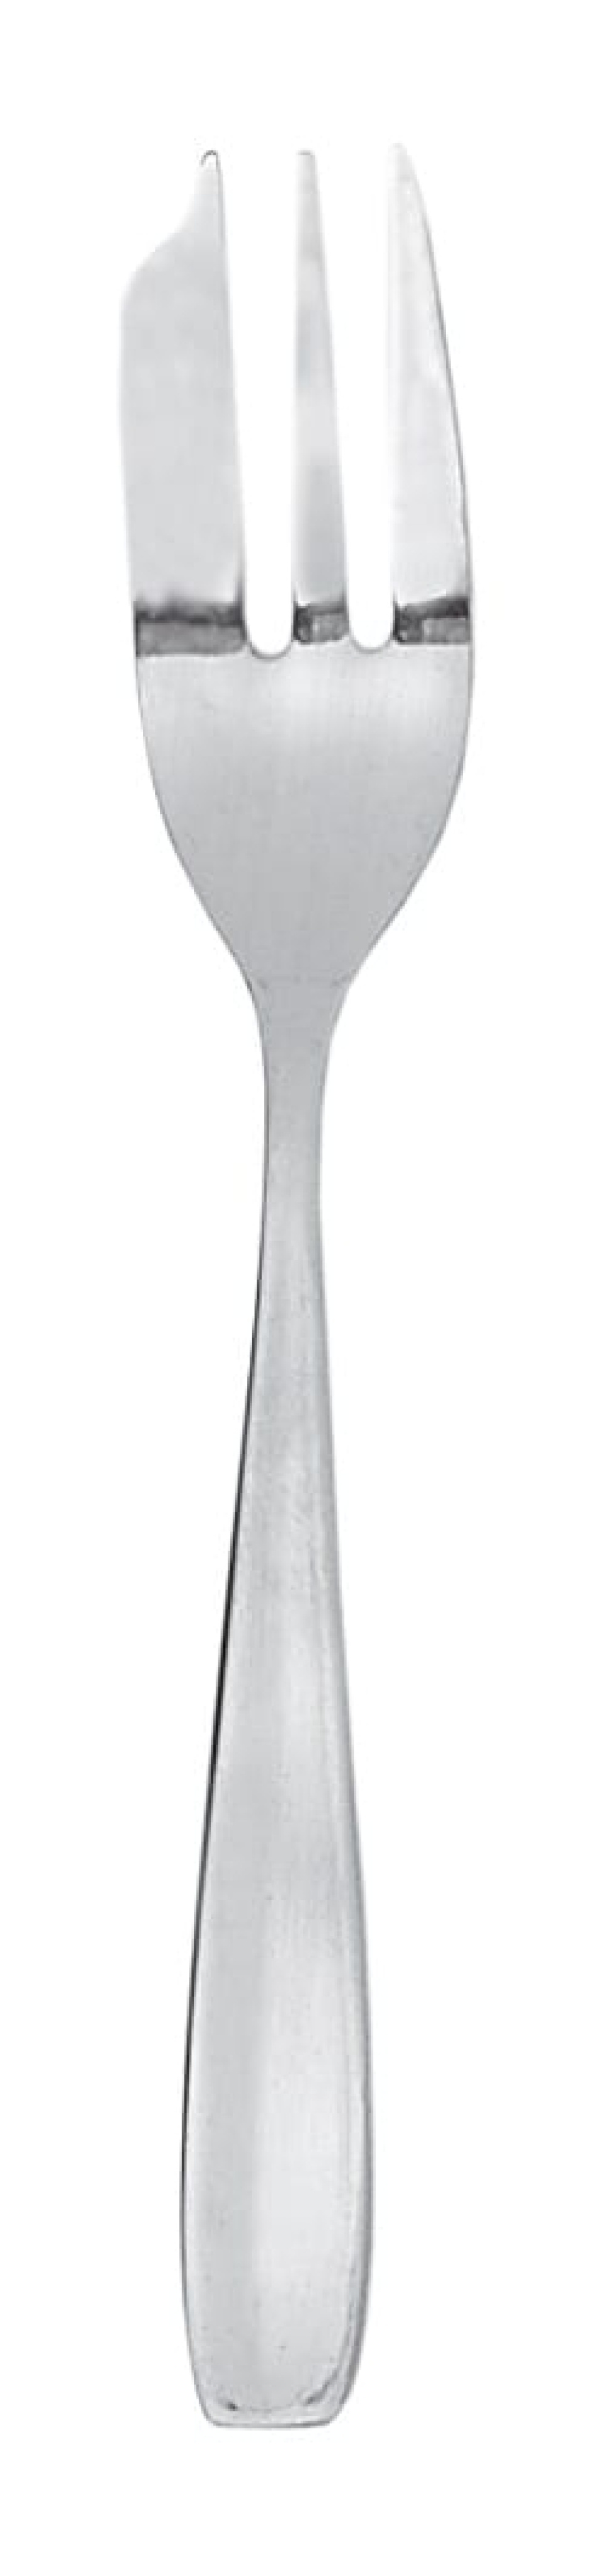 Pastry fork, 12-pack - Exxent Captain in the group Table setting / Cutlery / Forks at KitchenLab (1071-10213)